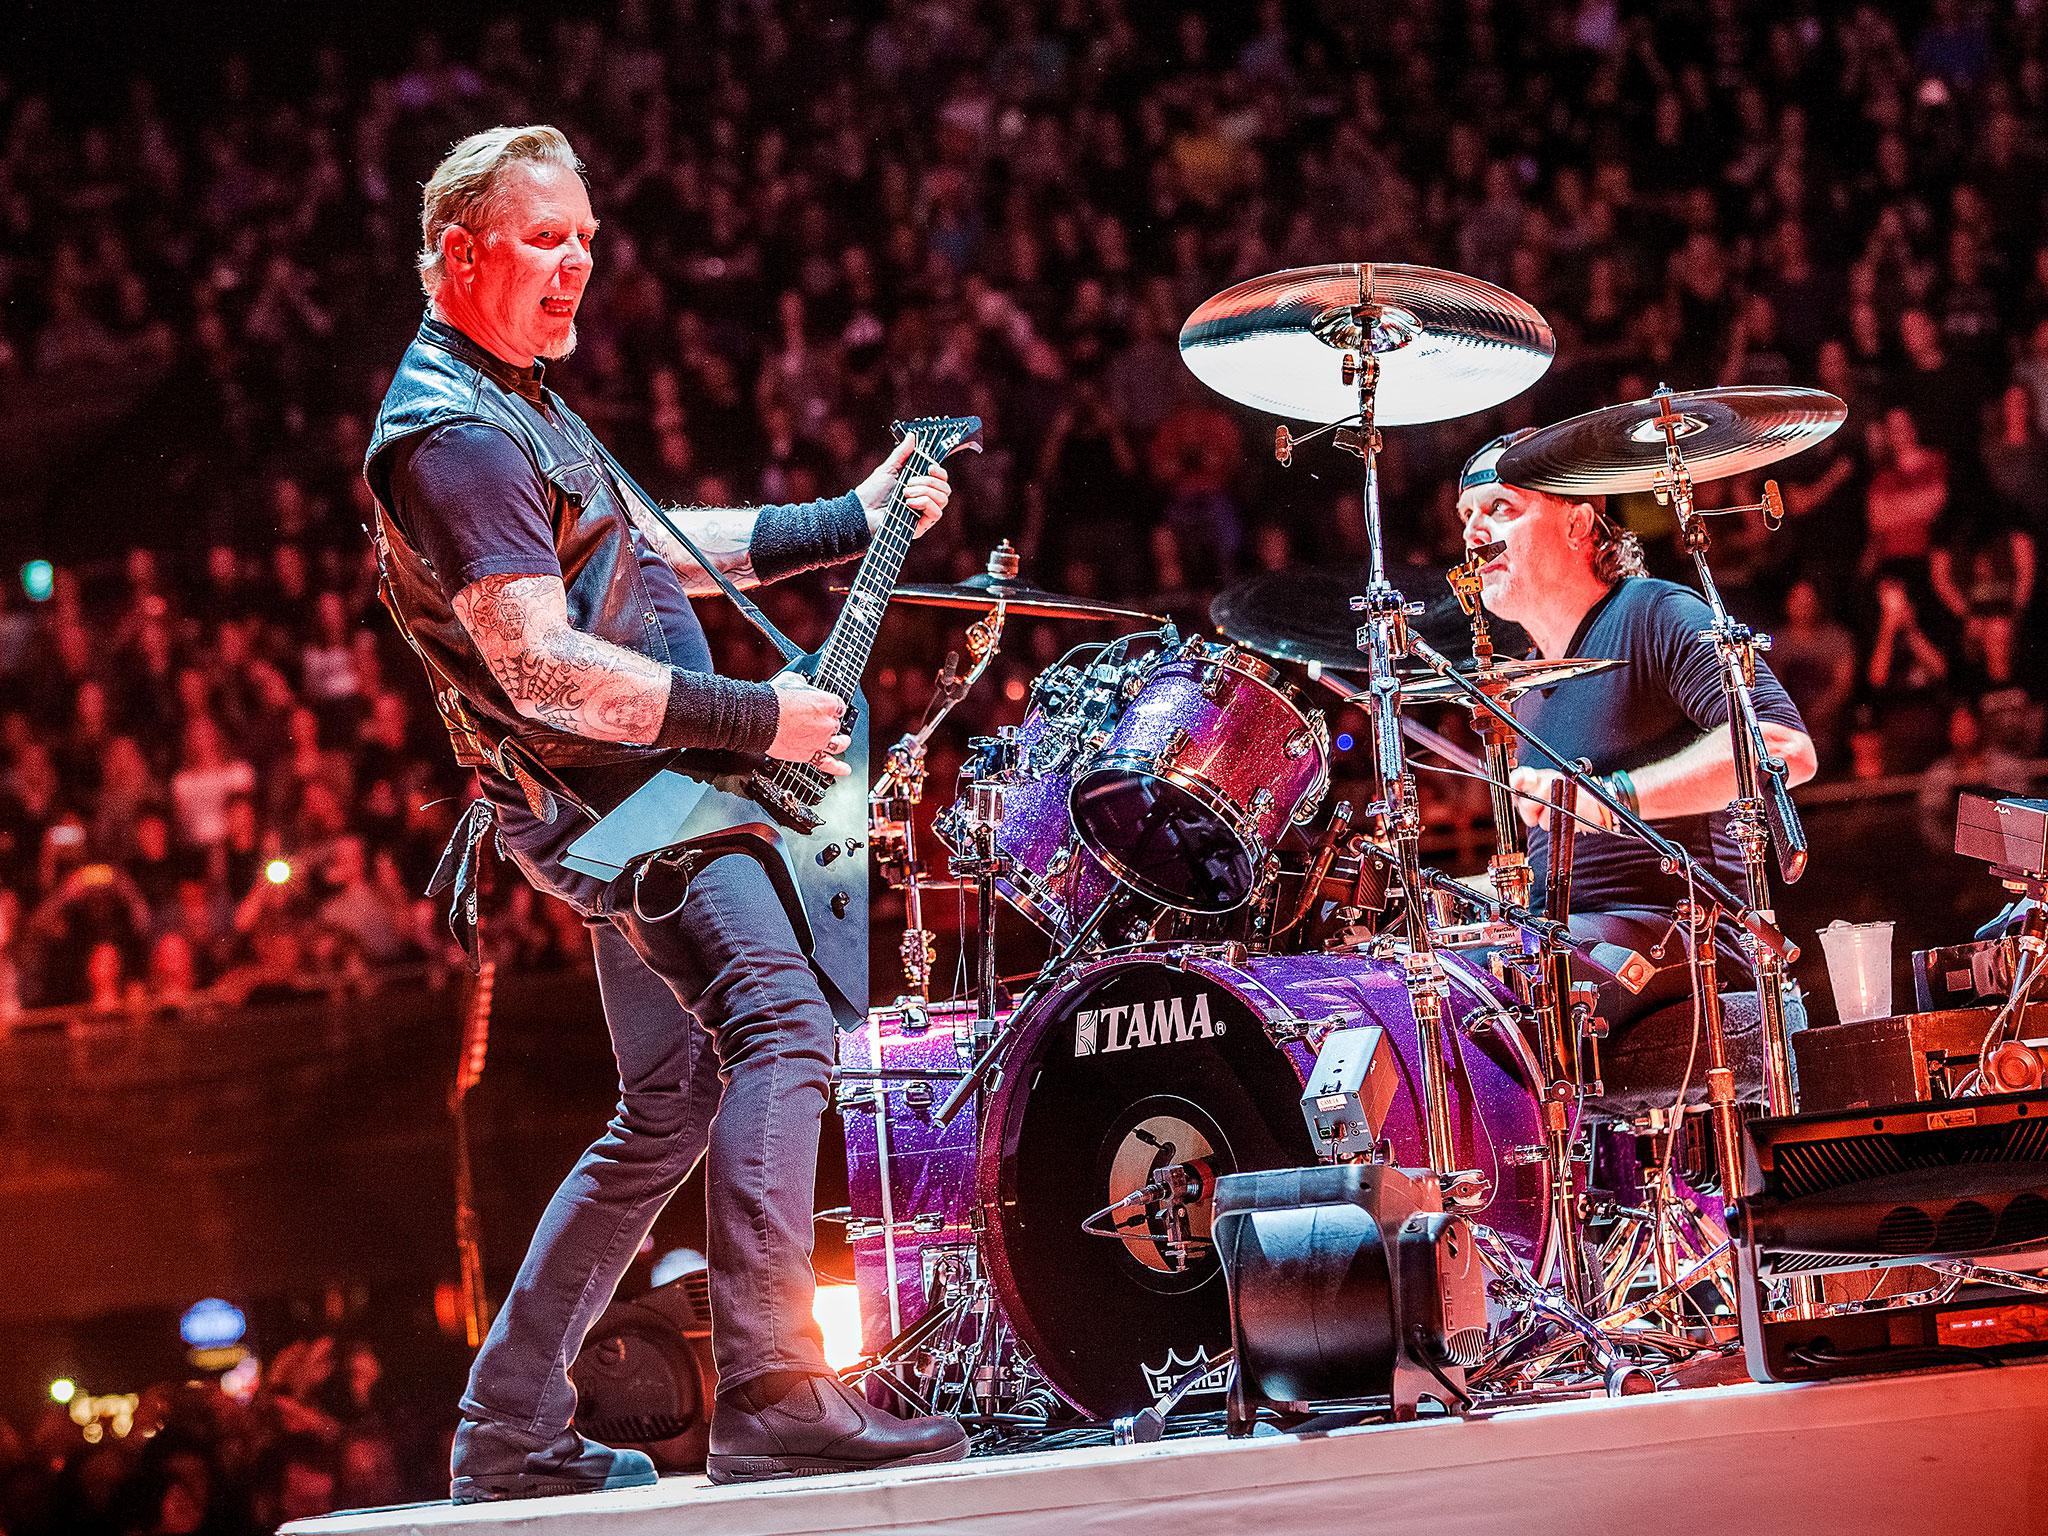 Metallica’s core songwriting unit, James Hetfield and Lars Ulrich